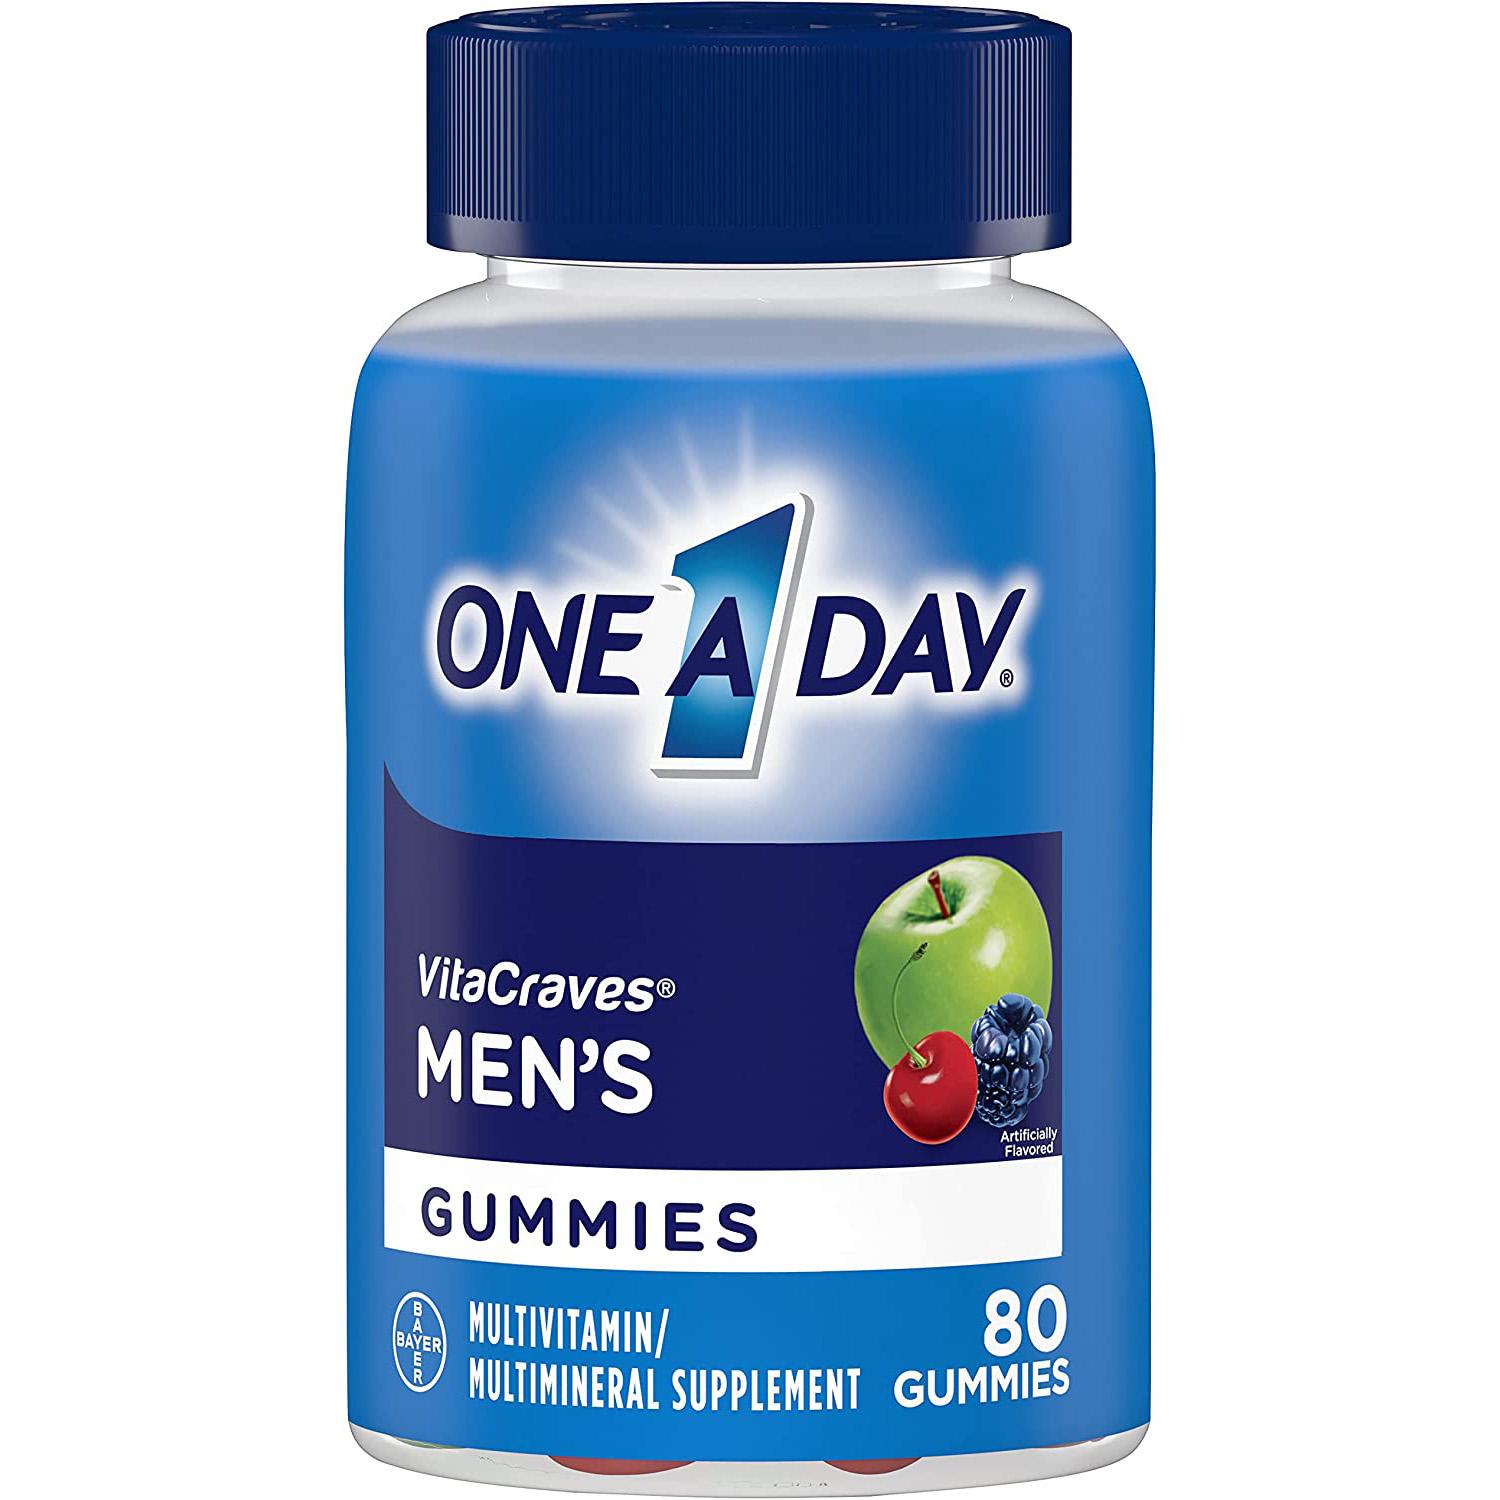 One A Day Mens Multivitamin Gummies for $3.45 Shipped